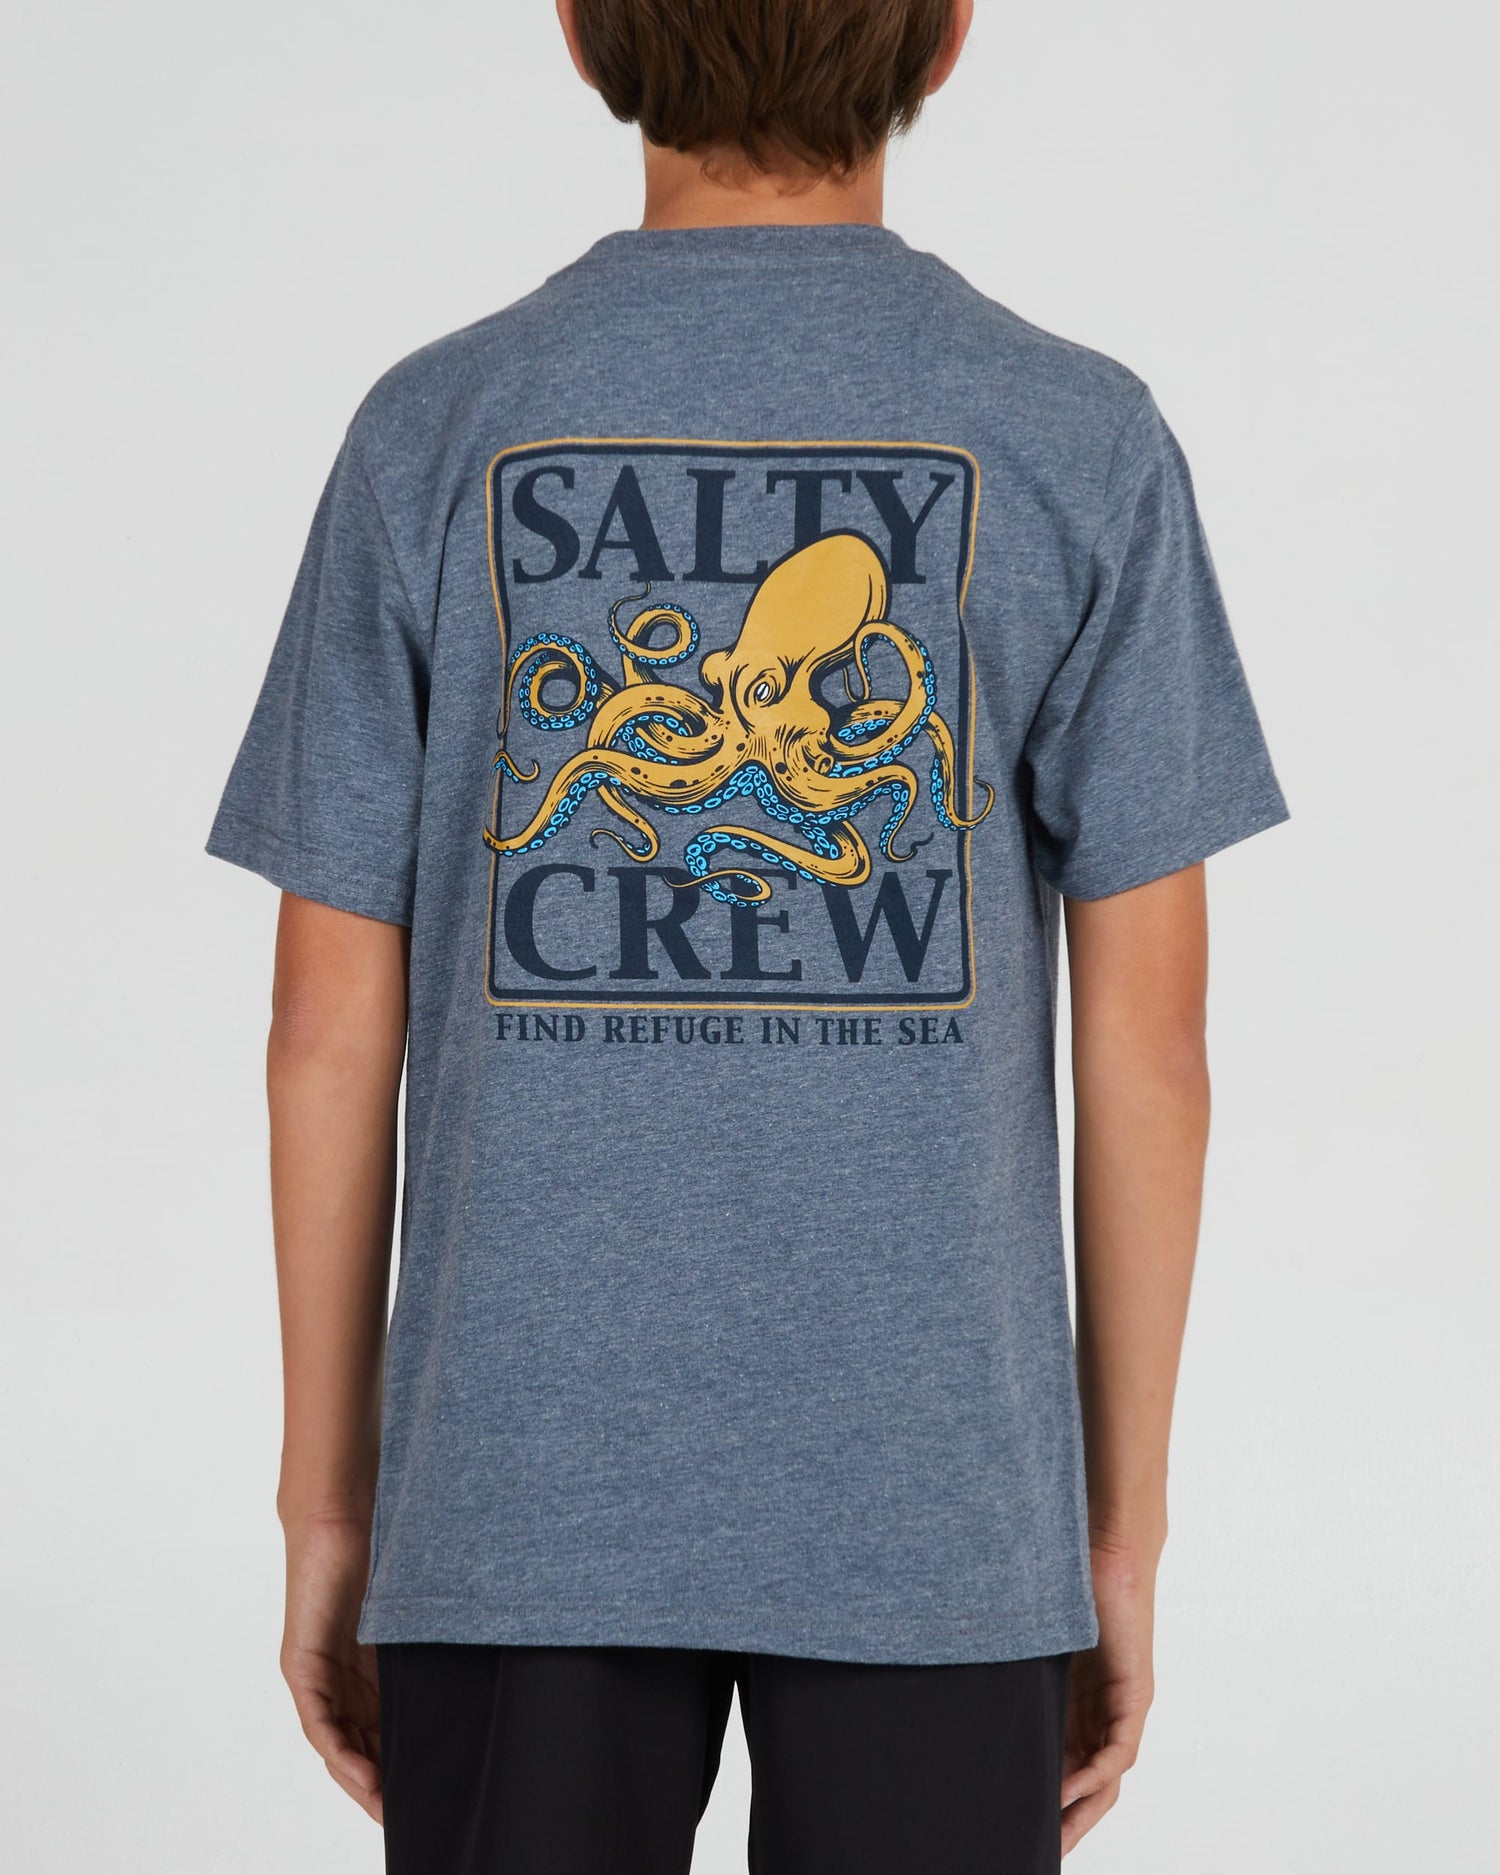 Salty crew T-SHIRTS S/S INK SLINGER BOYS S/S TEE - Athletic Heather in Athletic Heather